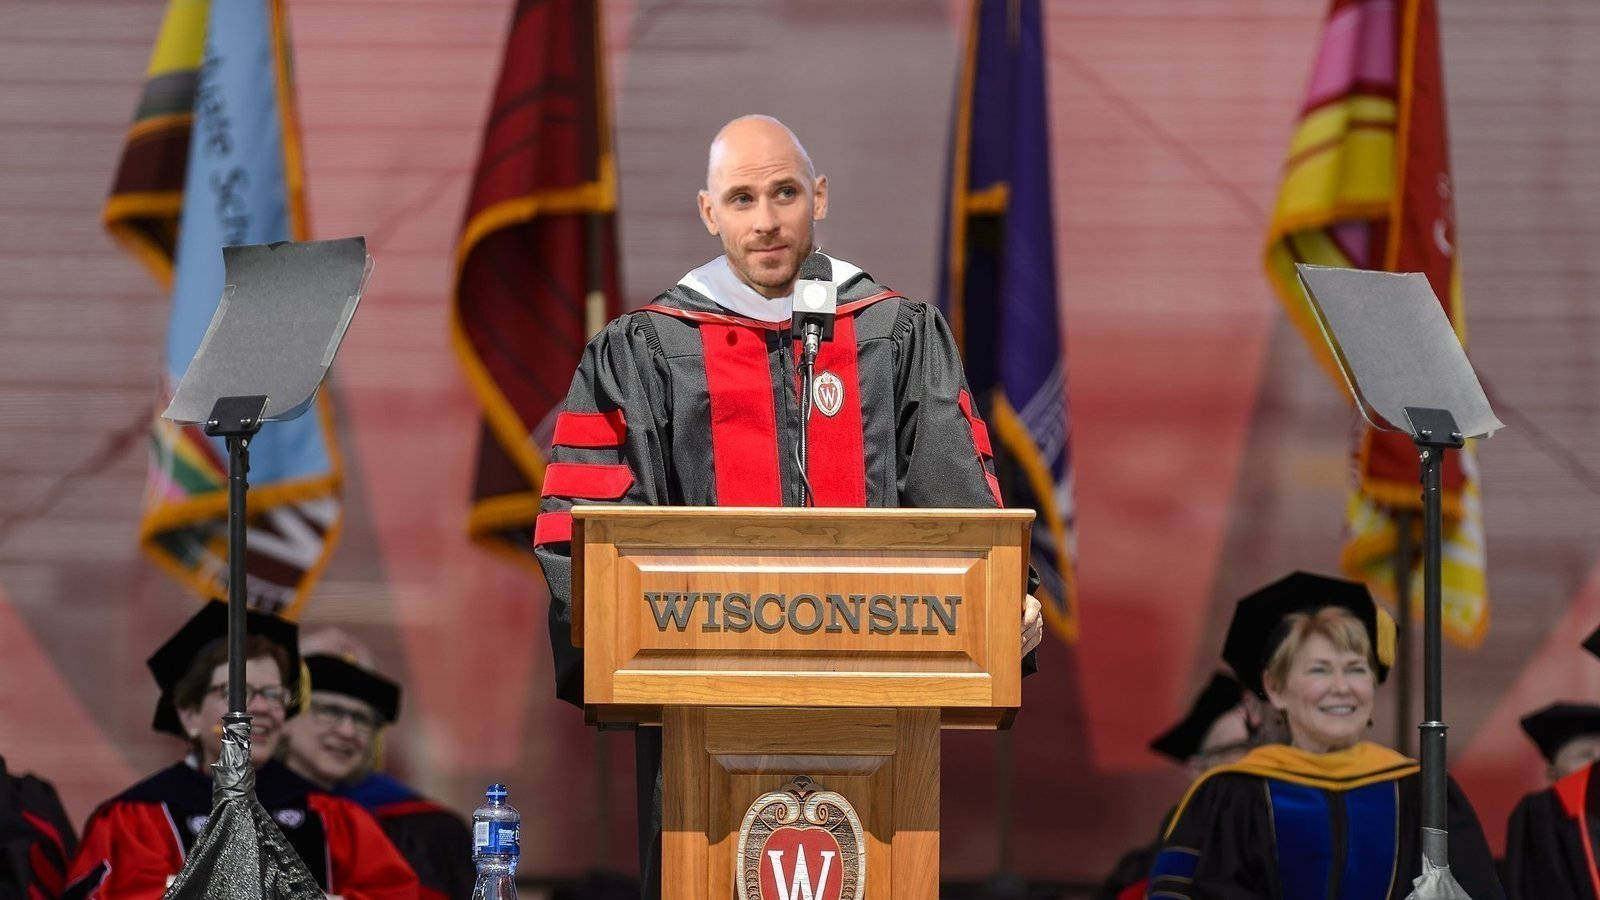 Youtube Star Johnny Sins Delivering Commencement Speech Wallpaper